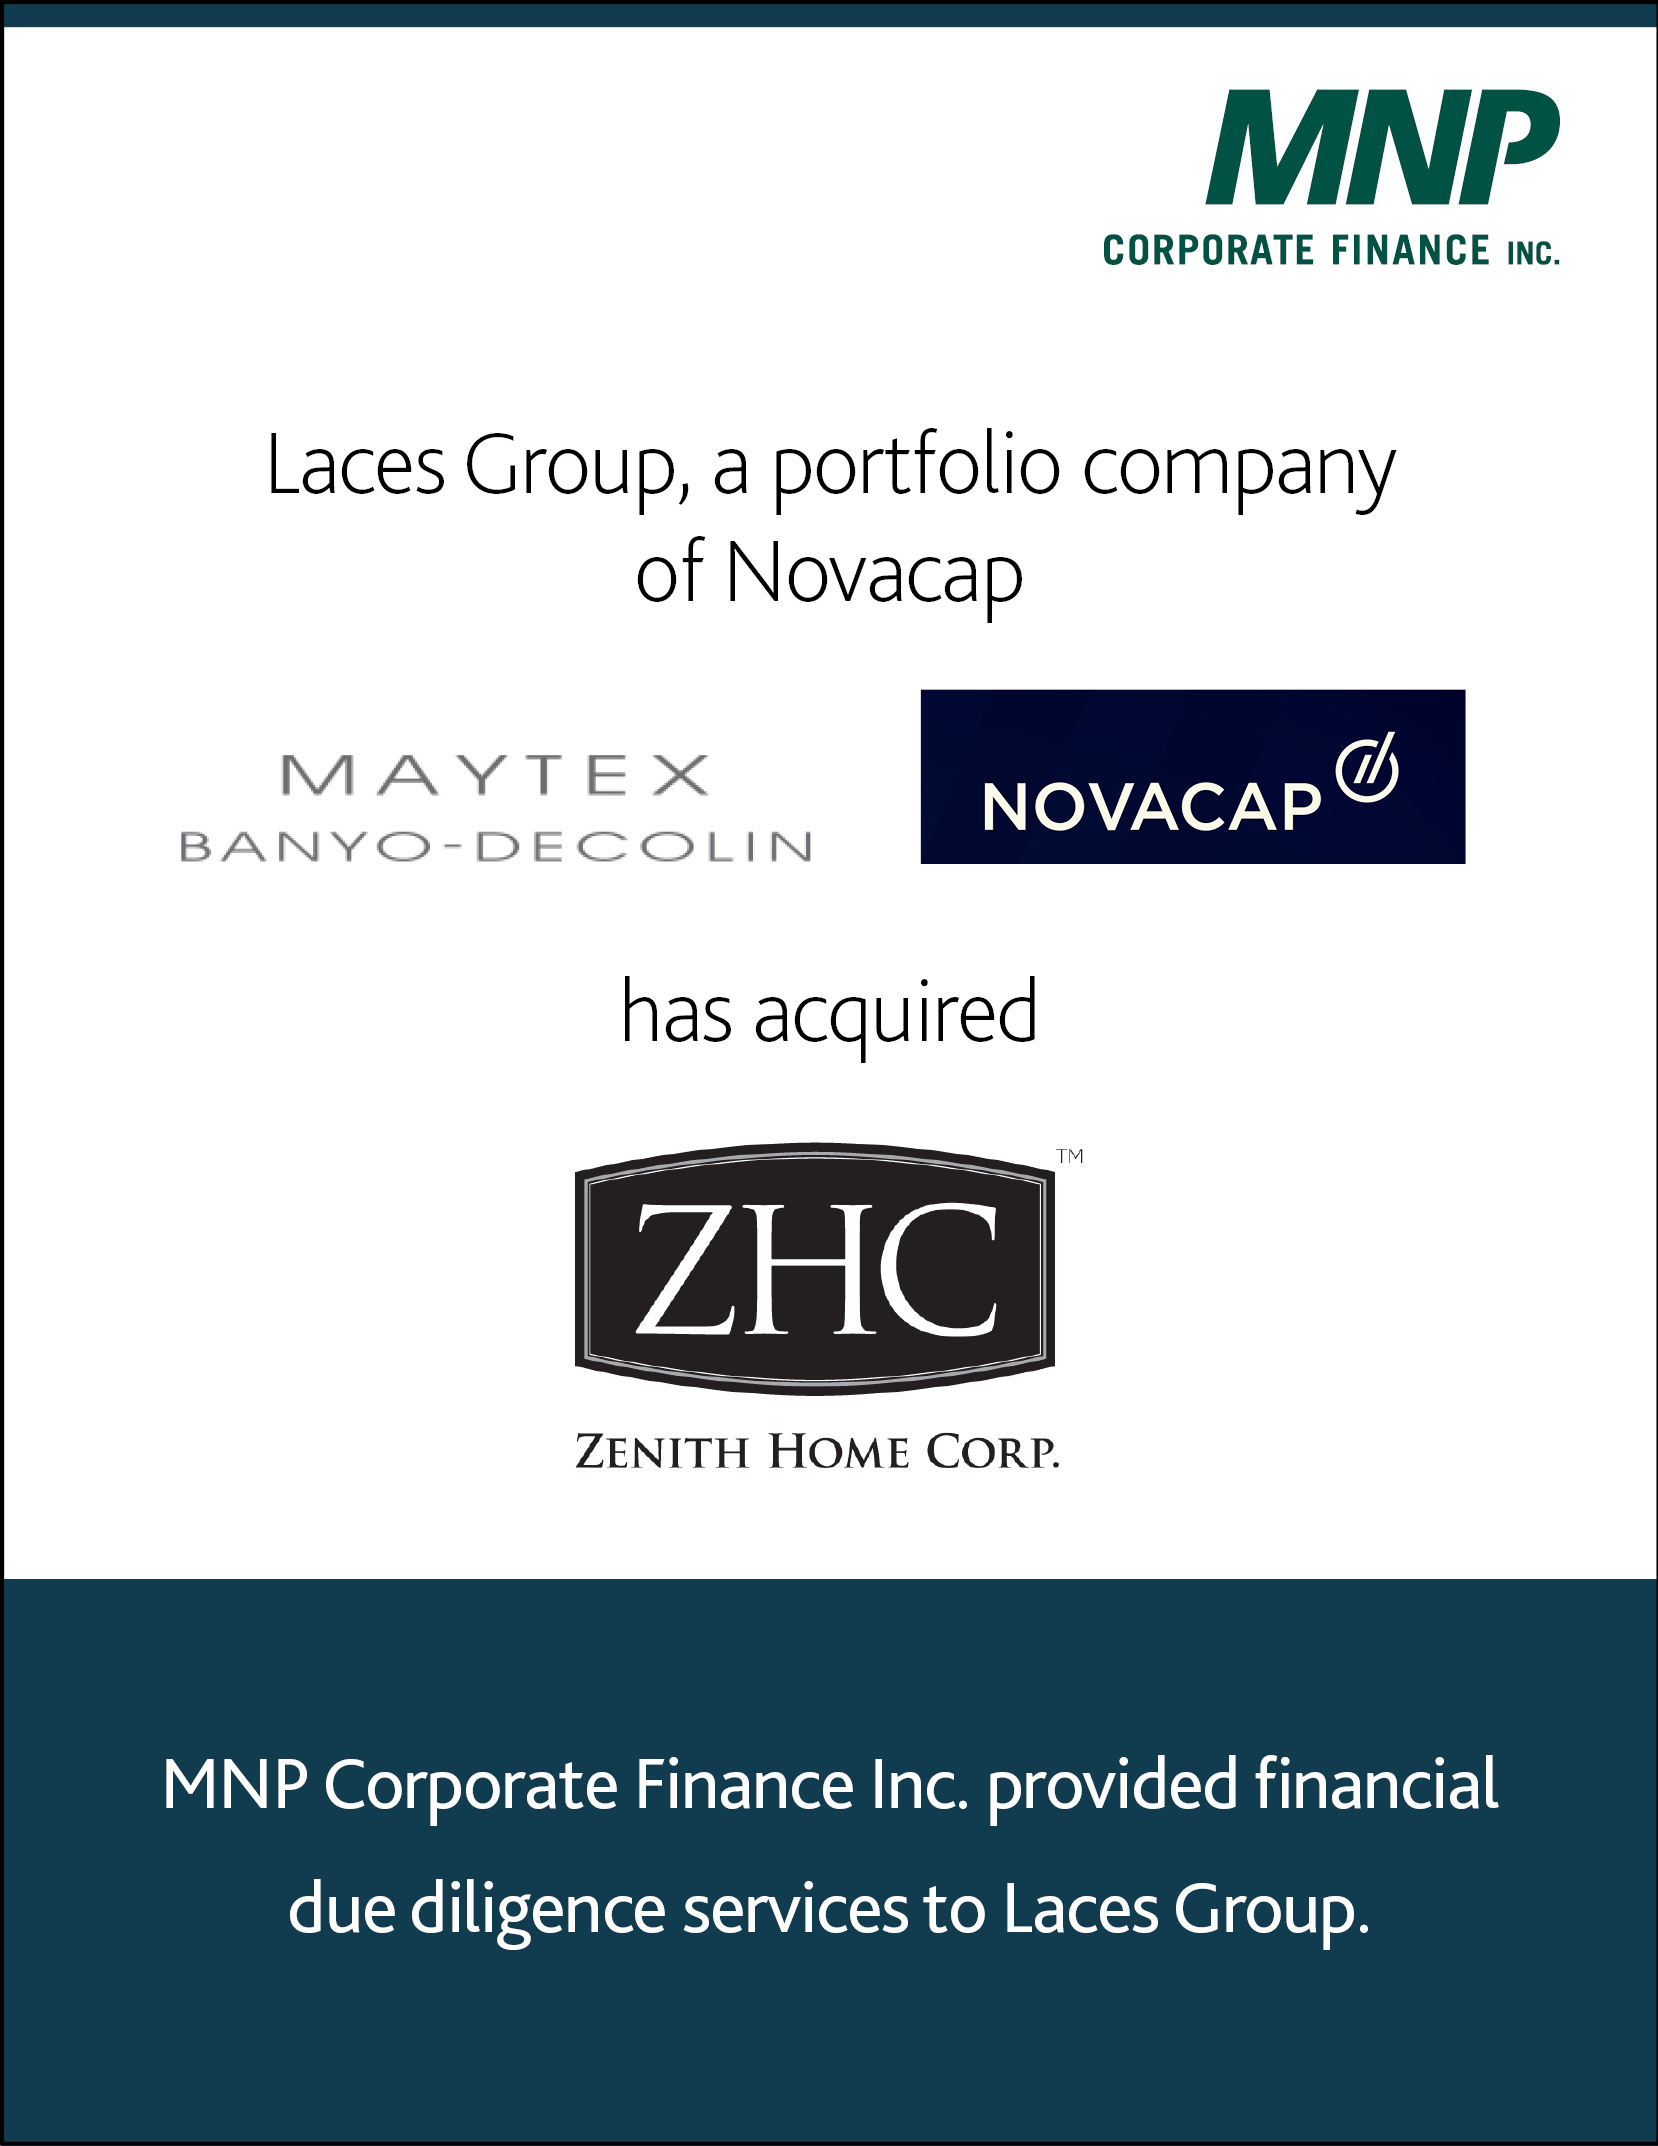 Laces Group, a portfolio company of Novacap, has acquired Zenith Products Corporation.